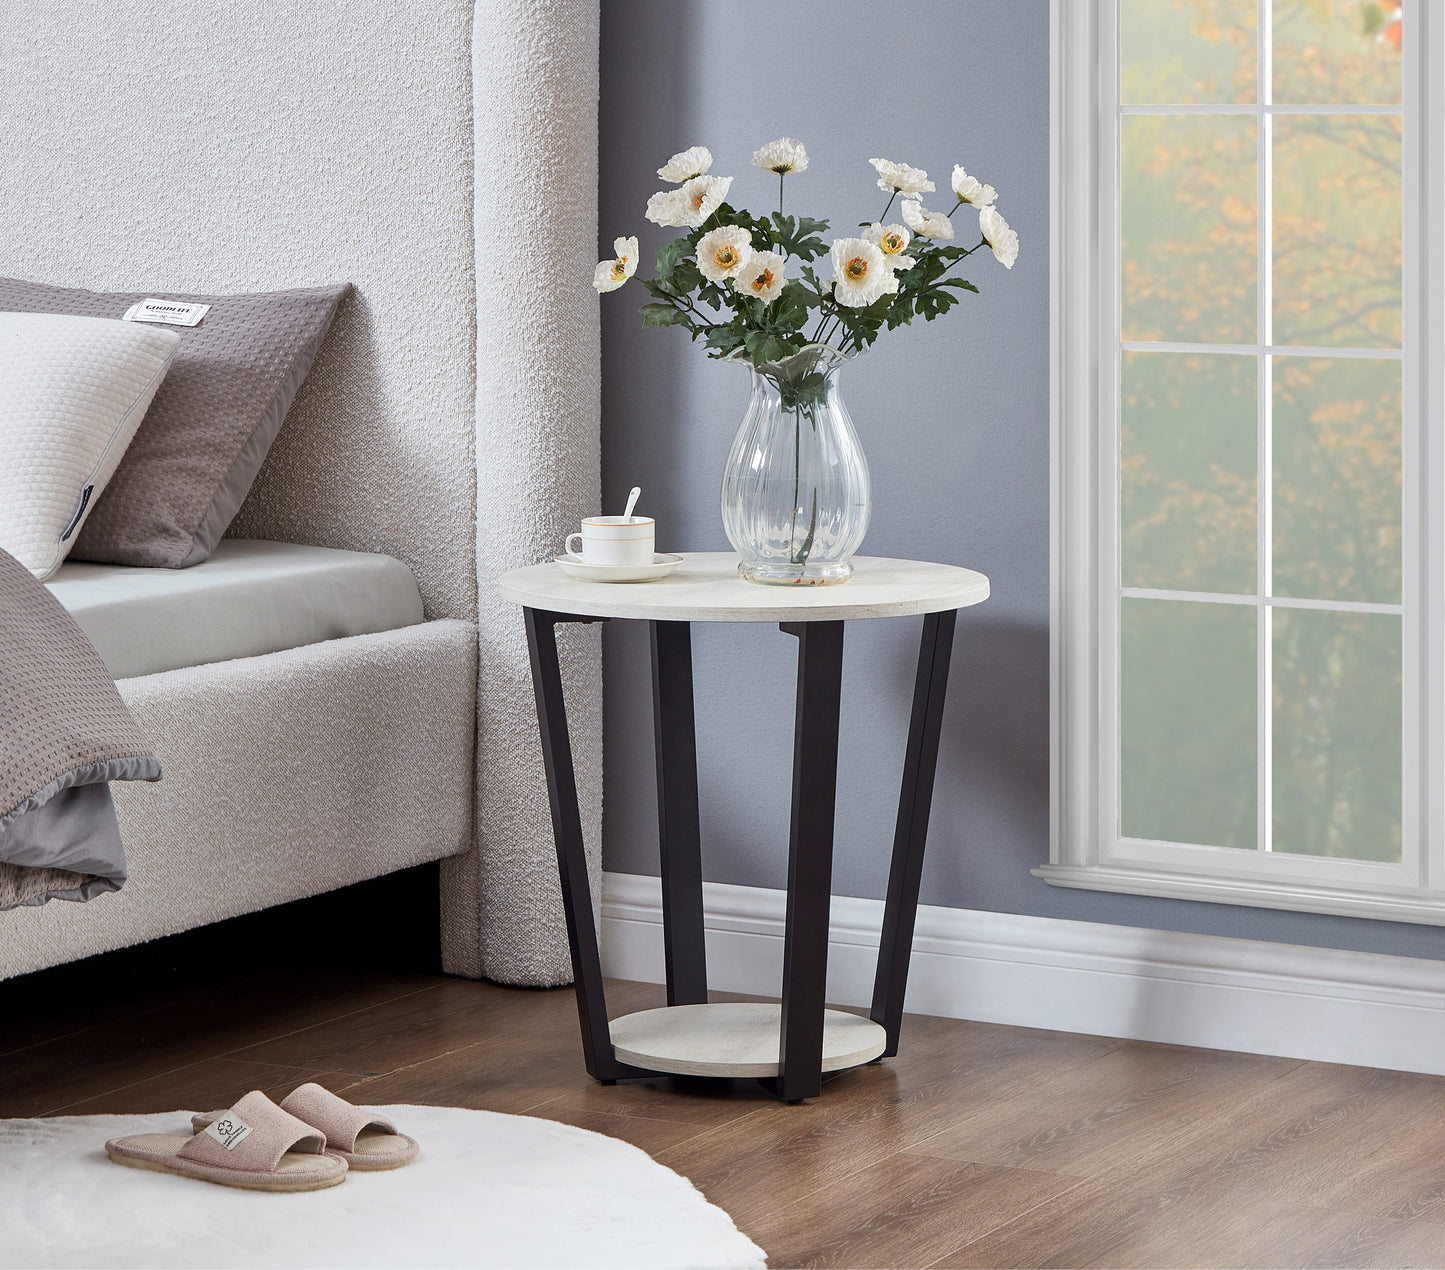 Roundhill Furniture Elysian Contemporary Round End Table with Shelf